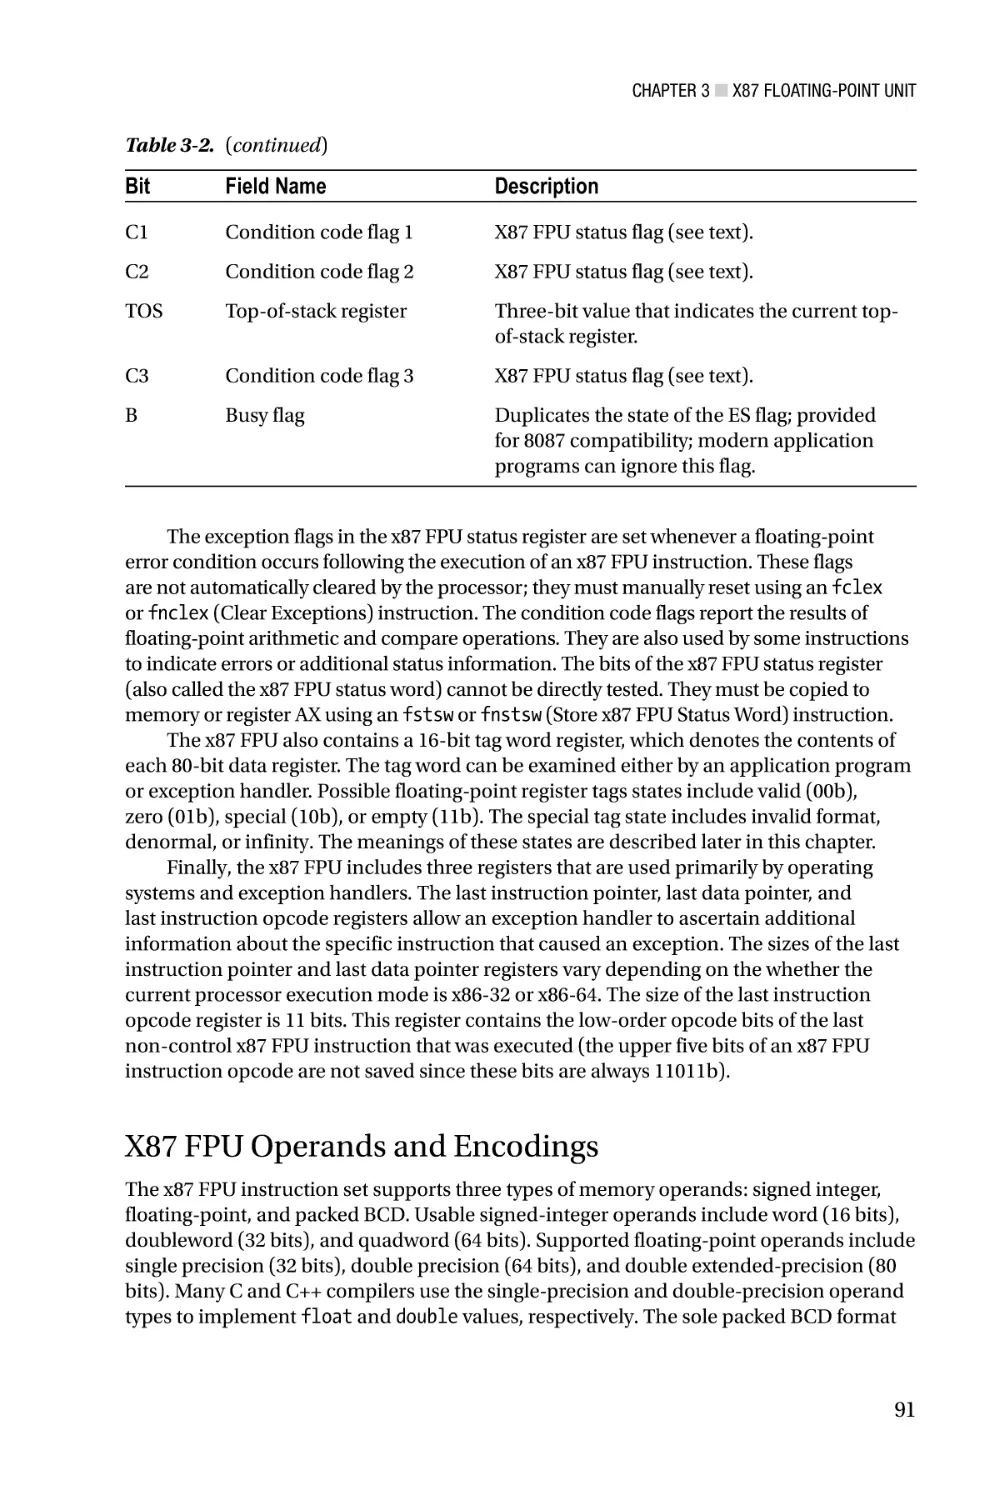 X87 FPU Operands and Encodings